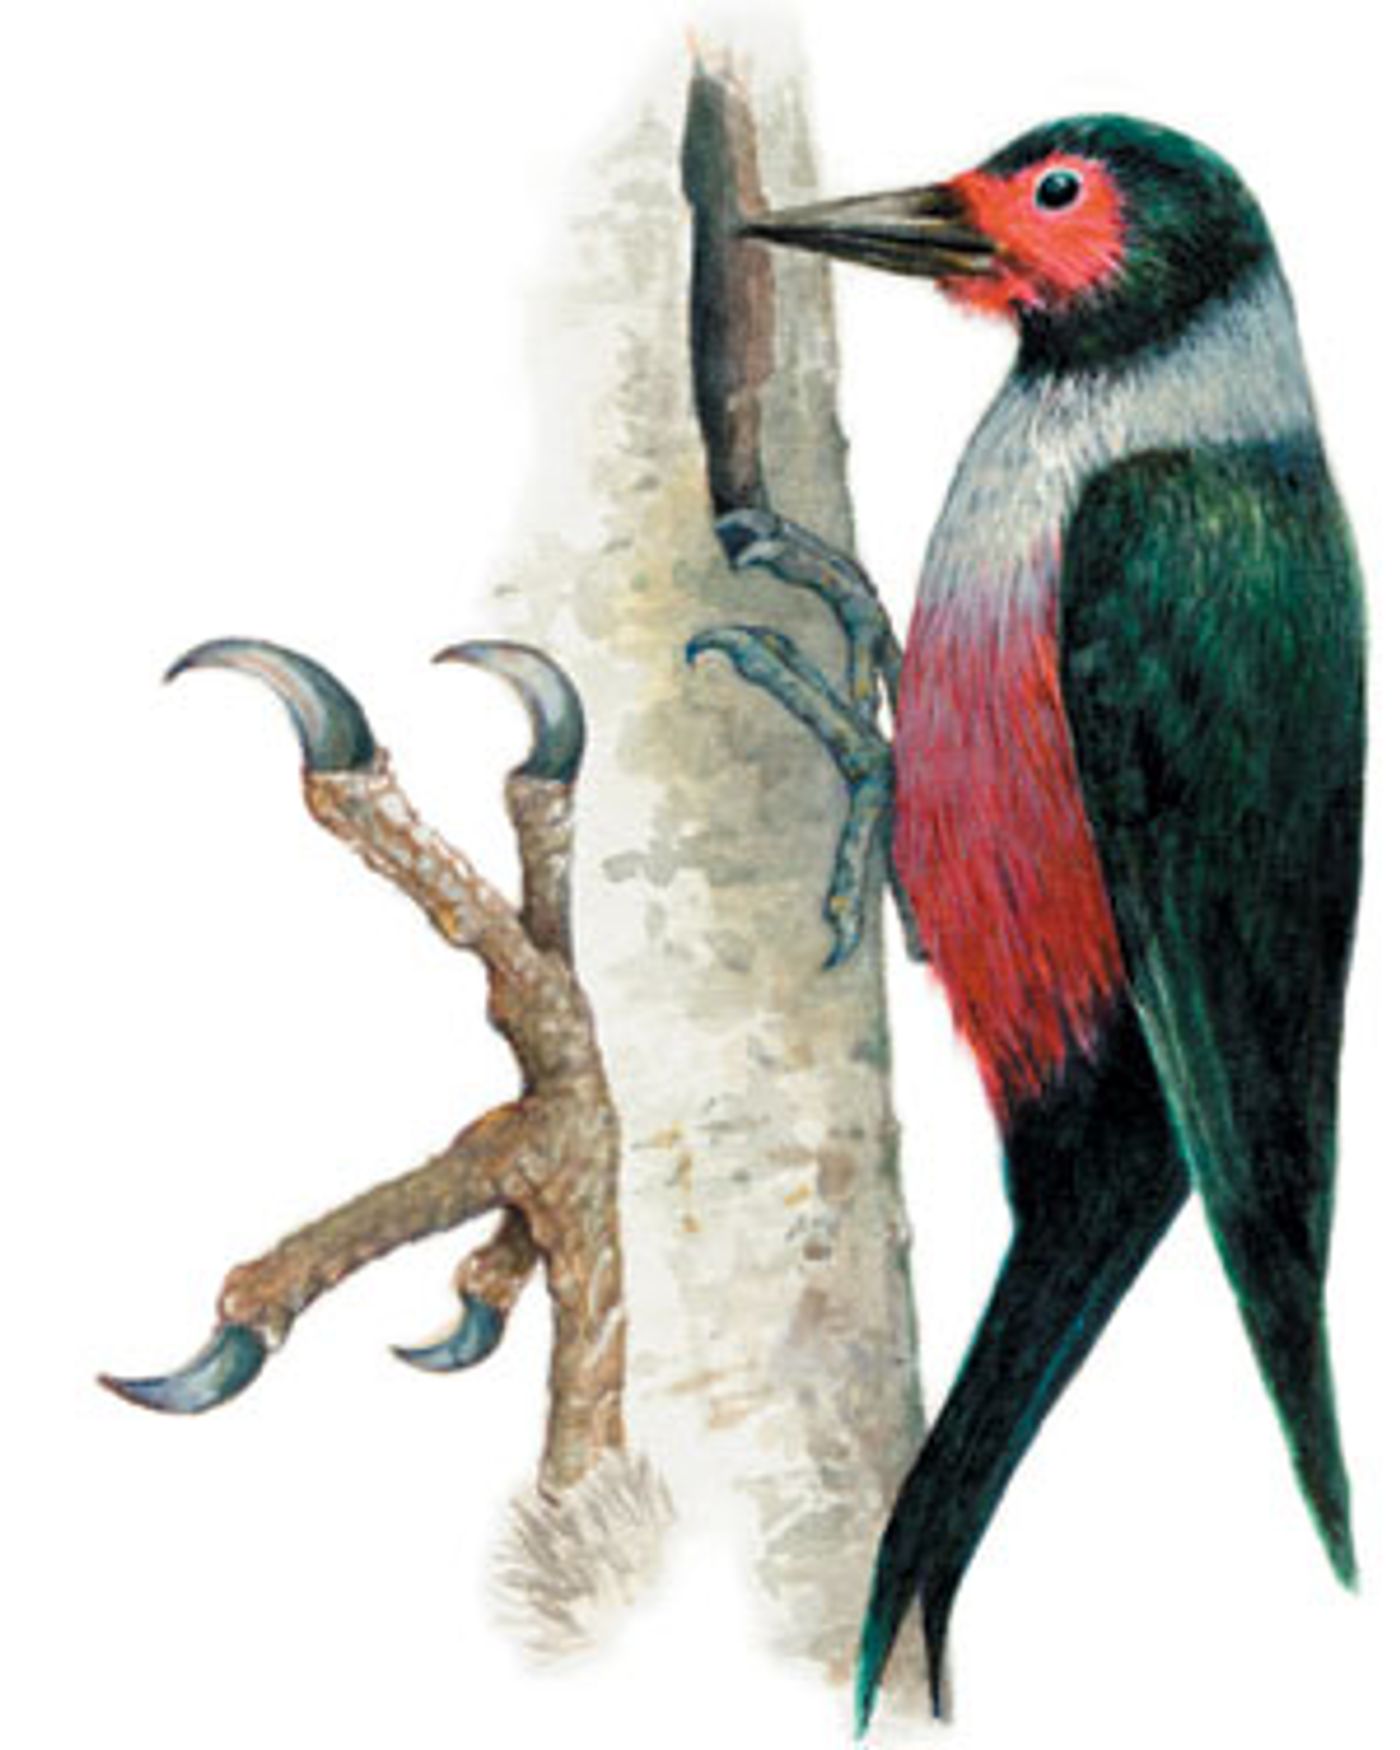 The orientation of woodpeckers' toes helps them to exert high forces